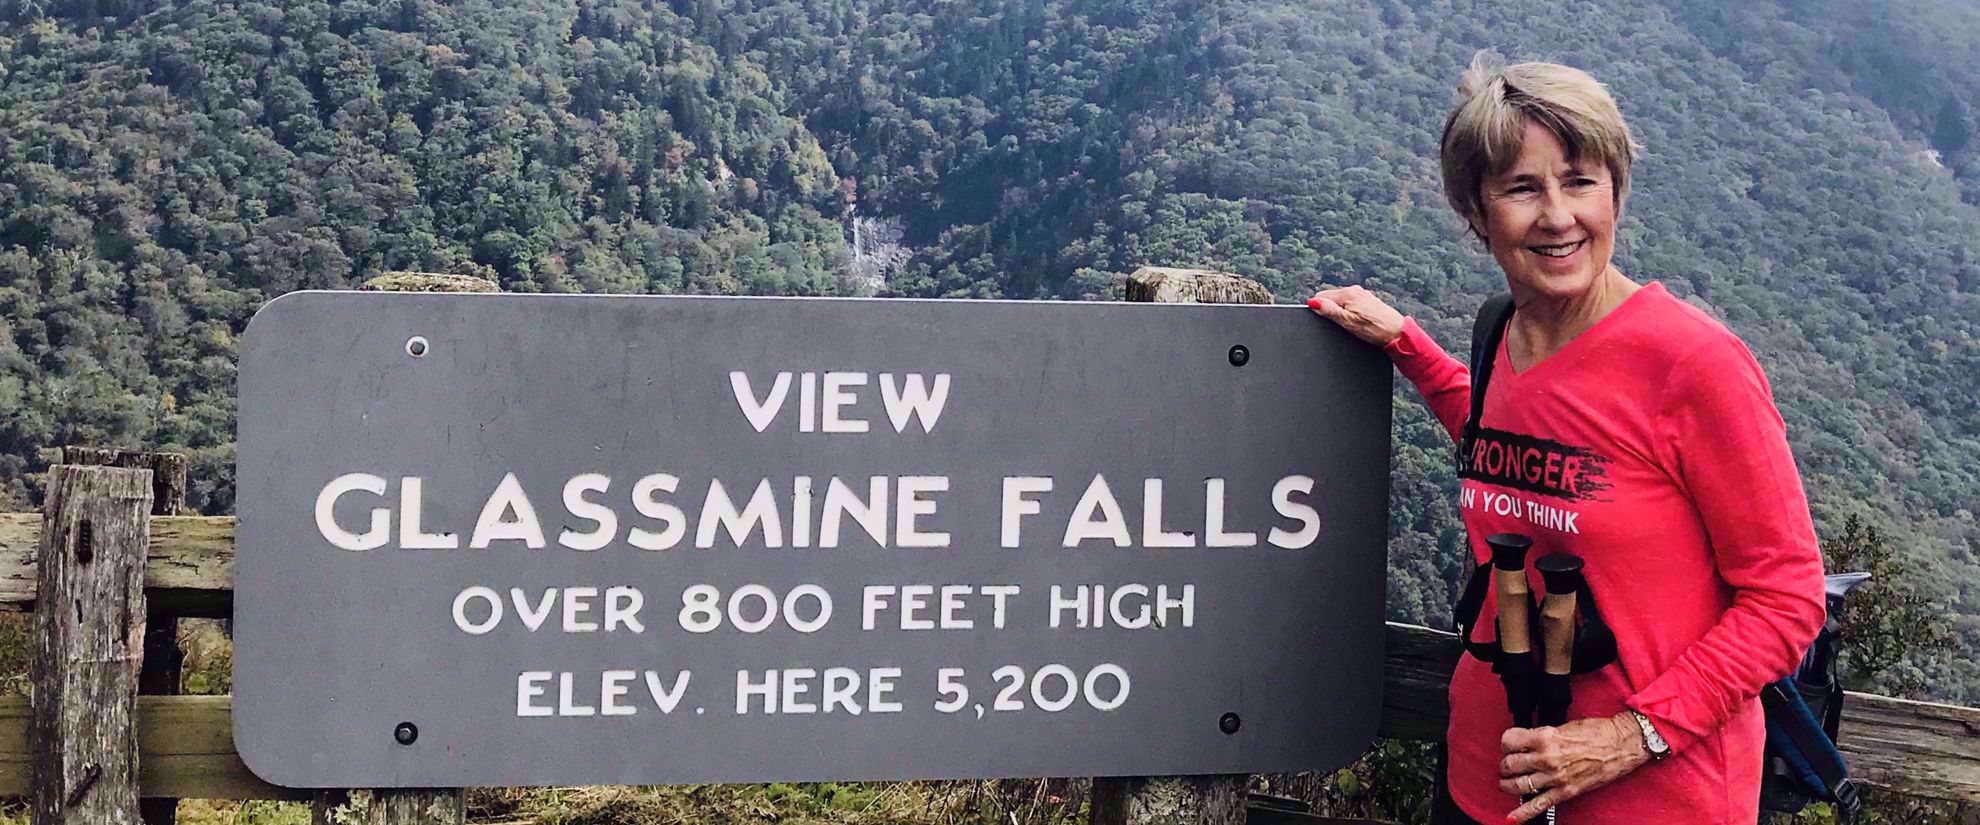 Woman smiling by Glassmine falls sign